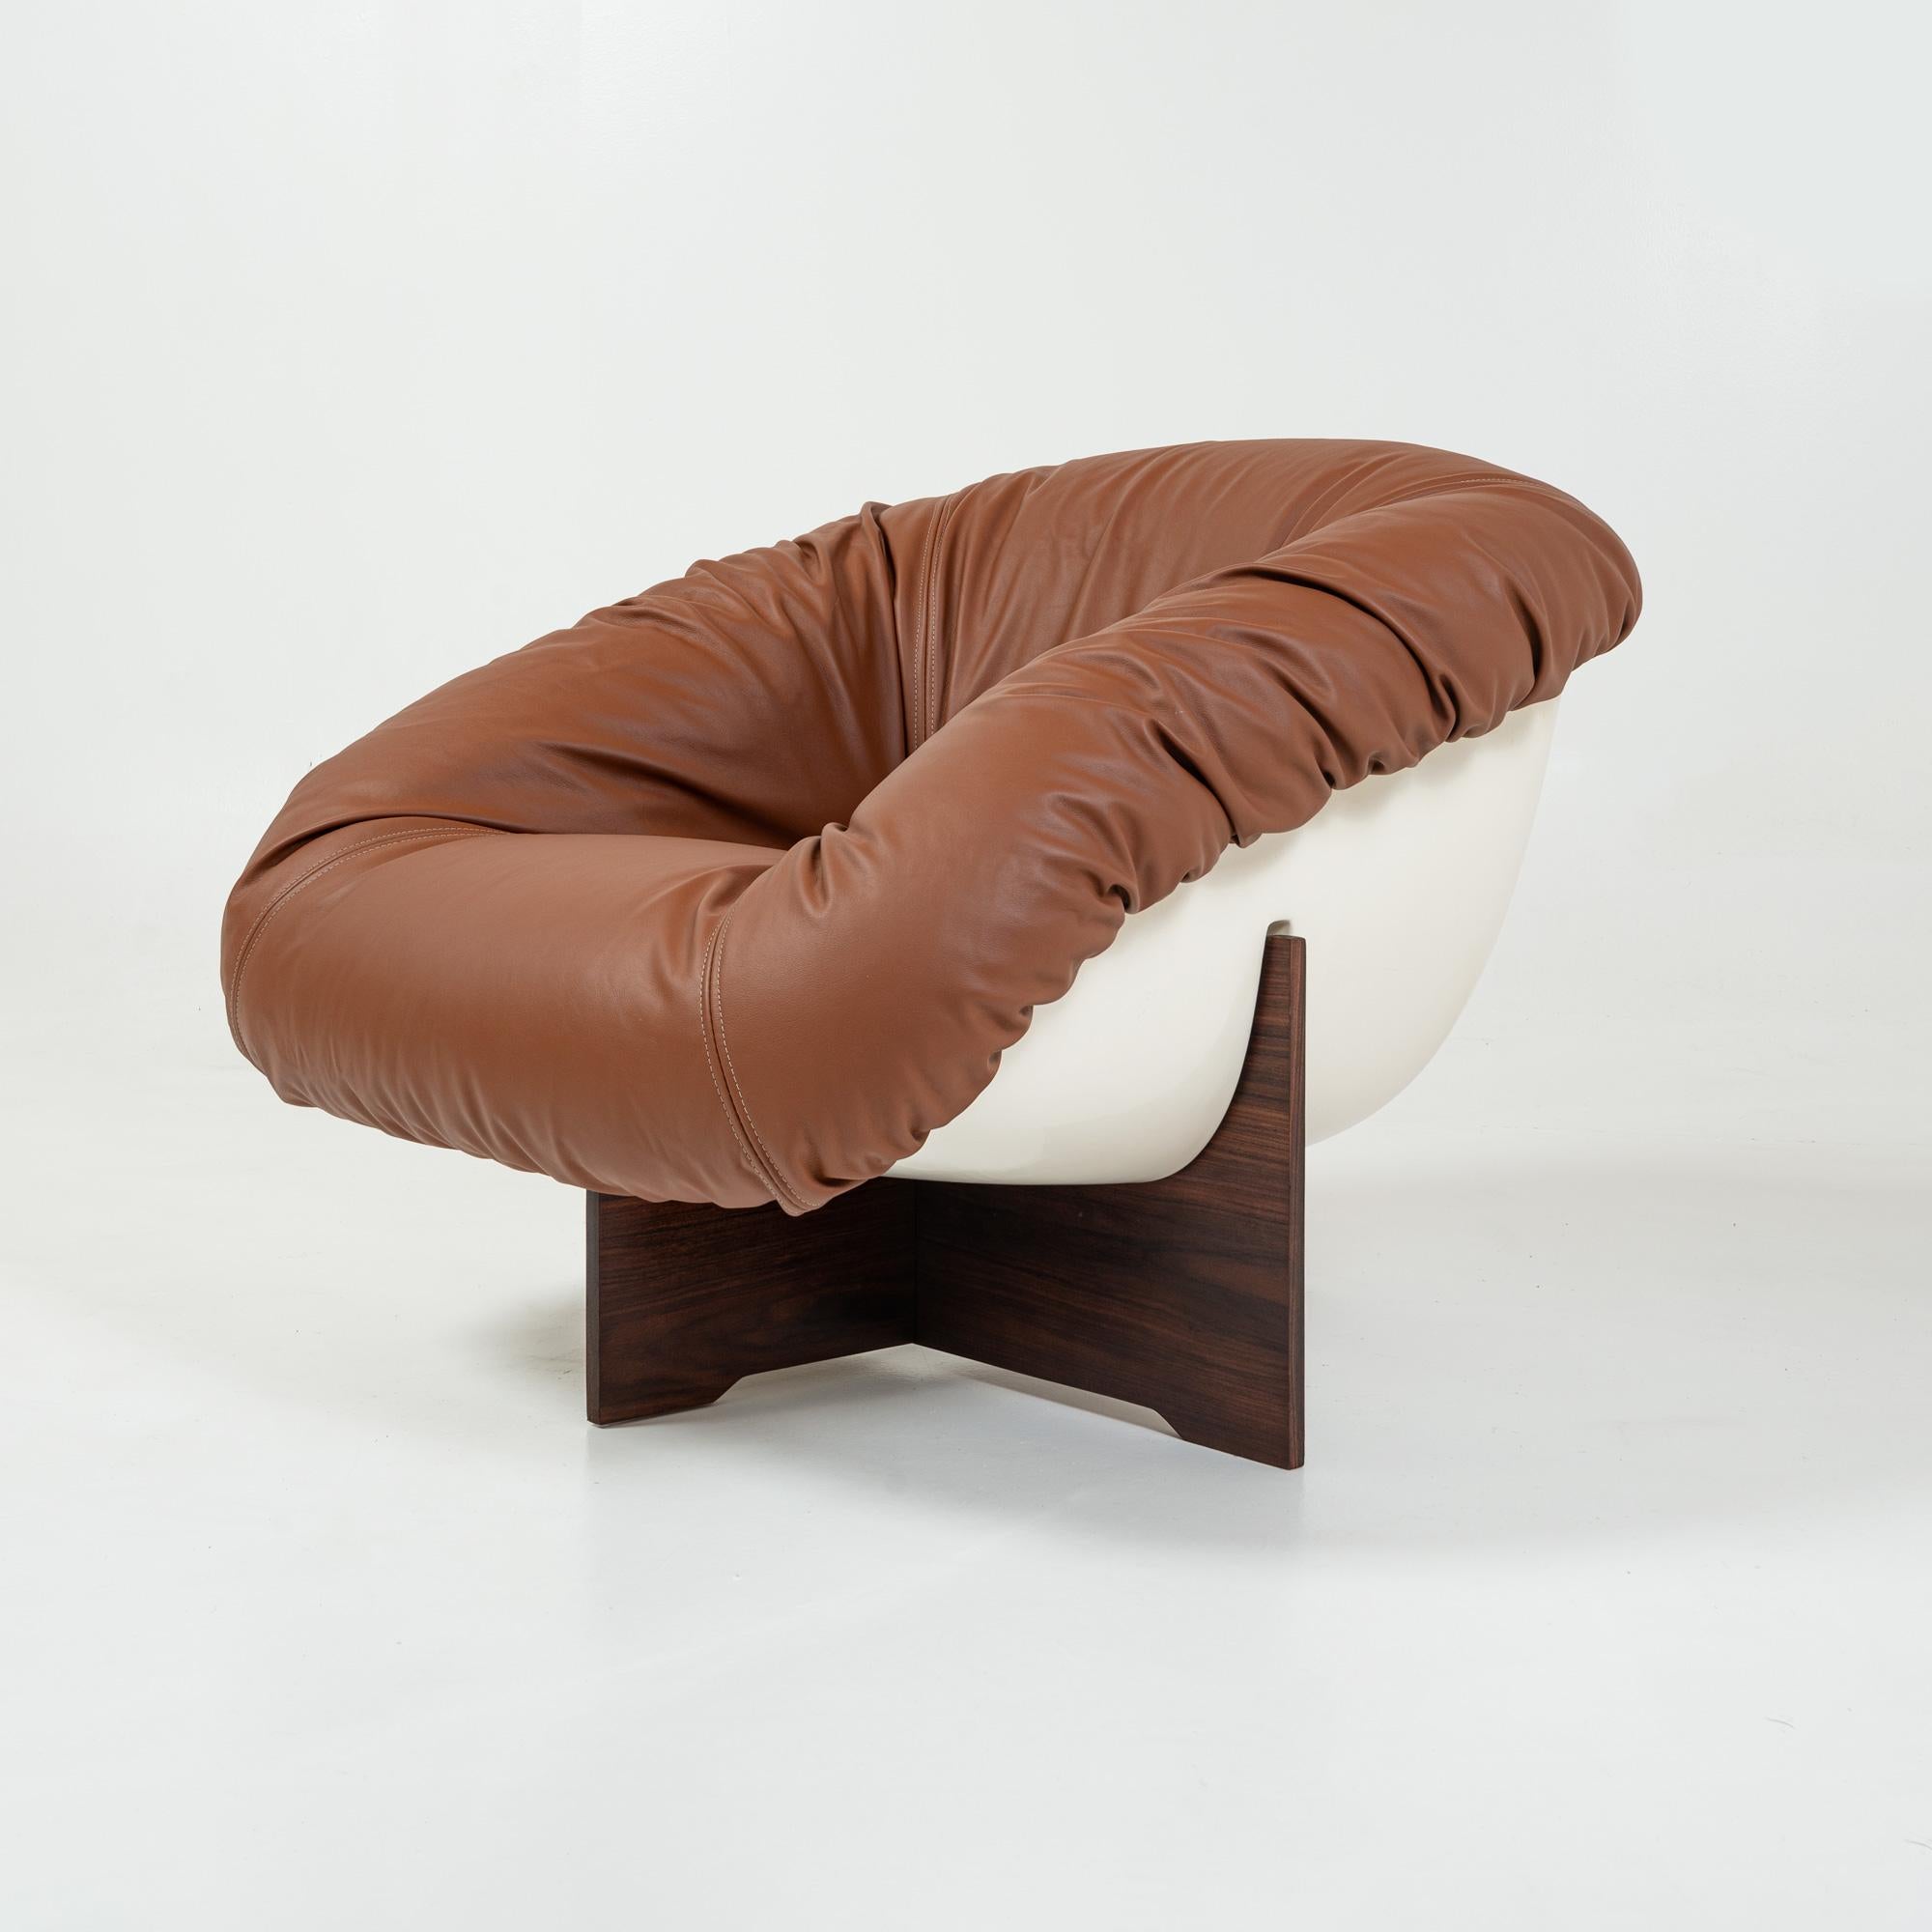 South American Percival Lafer's Lounge Chair model MP-61 in Maharam Leather and Rosewood, 1973 For Sale